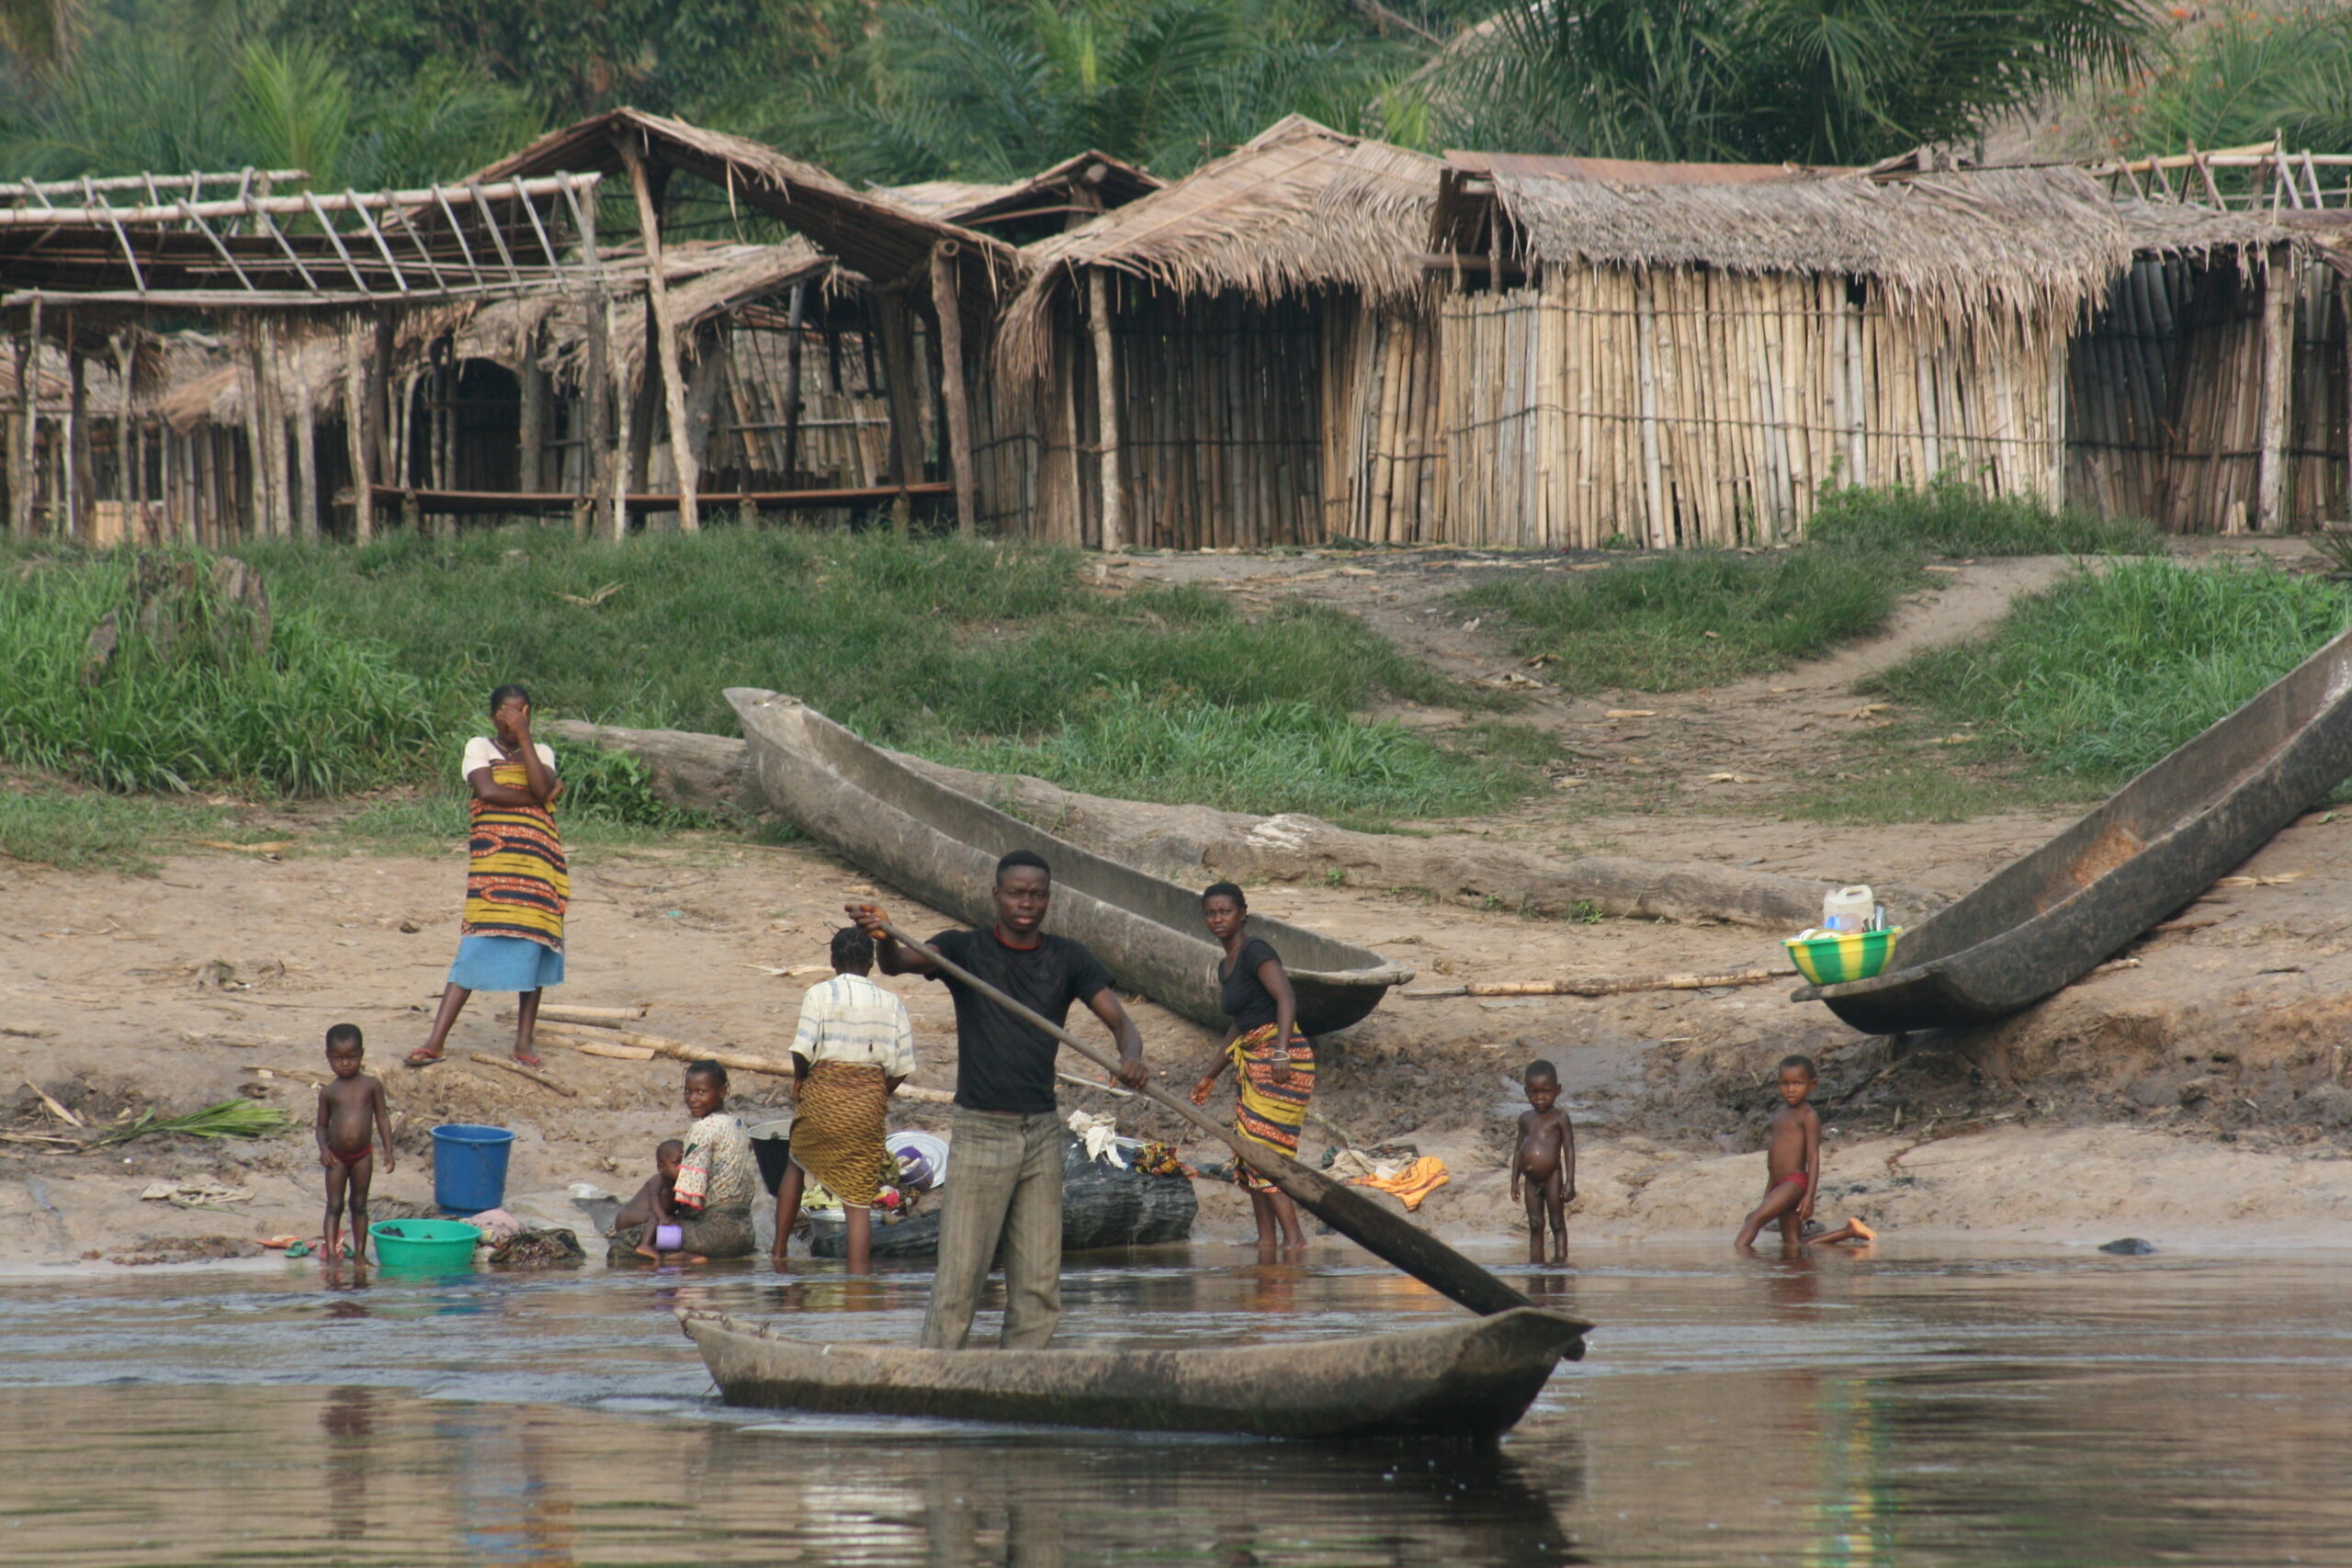 Village view with pirogue